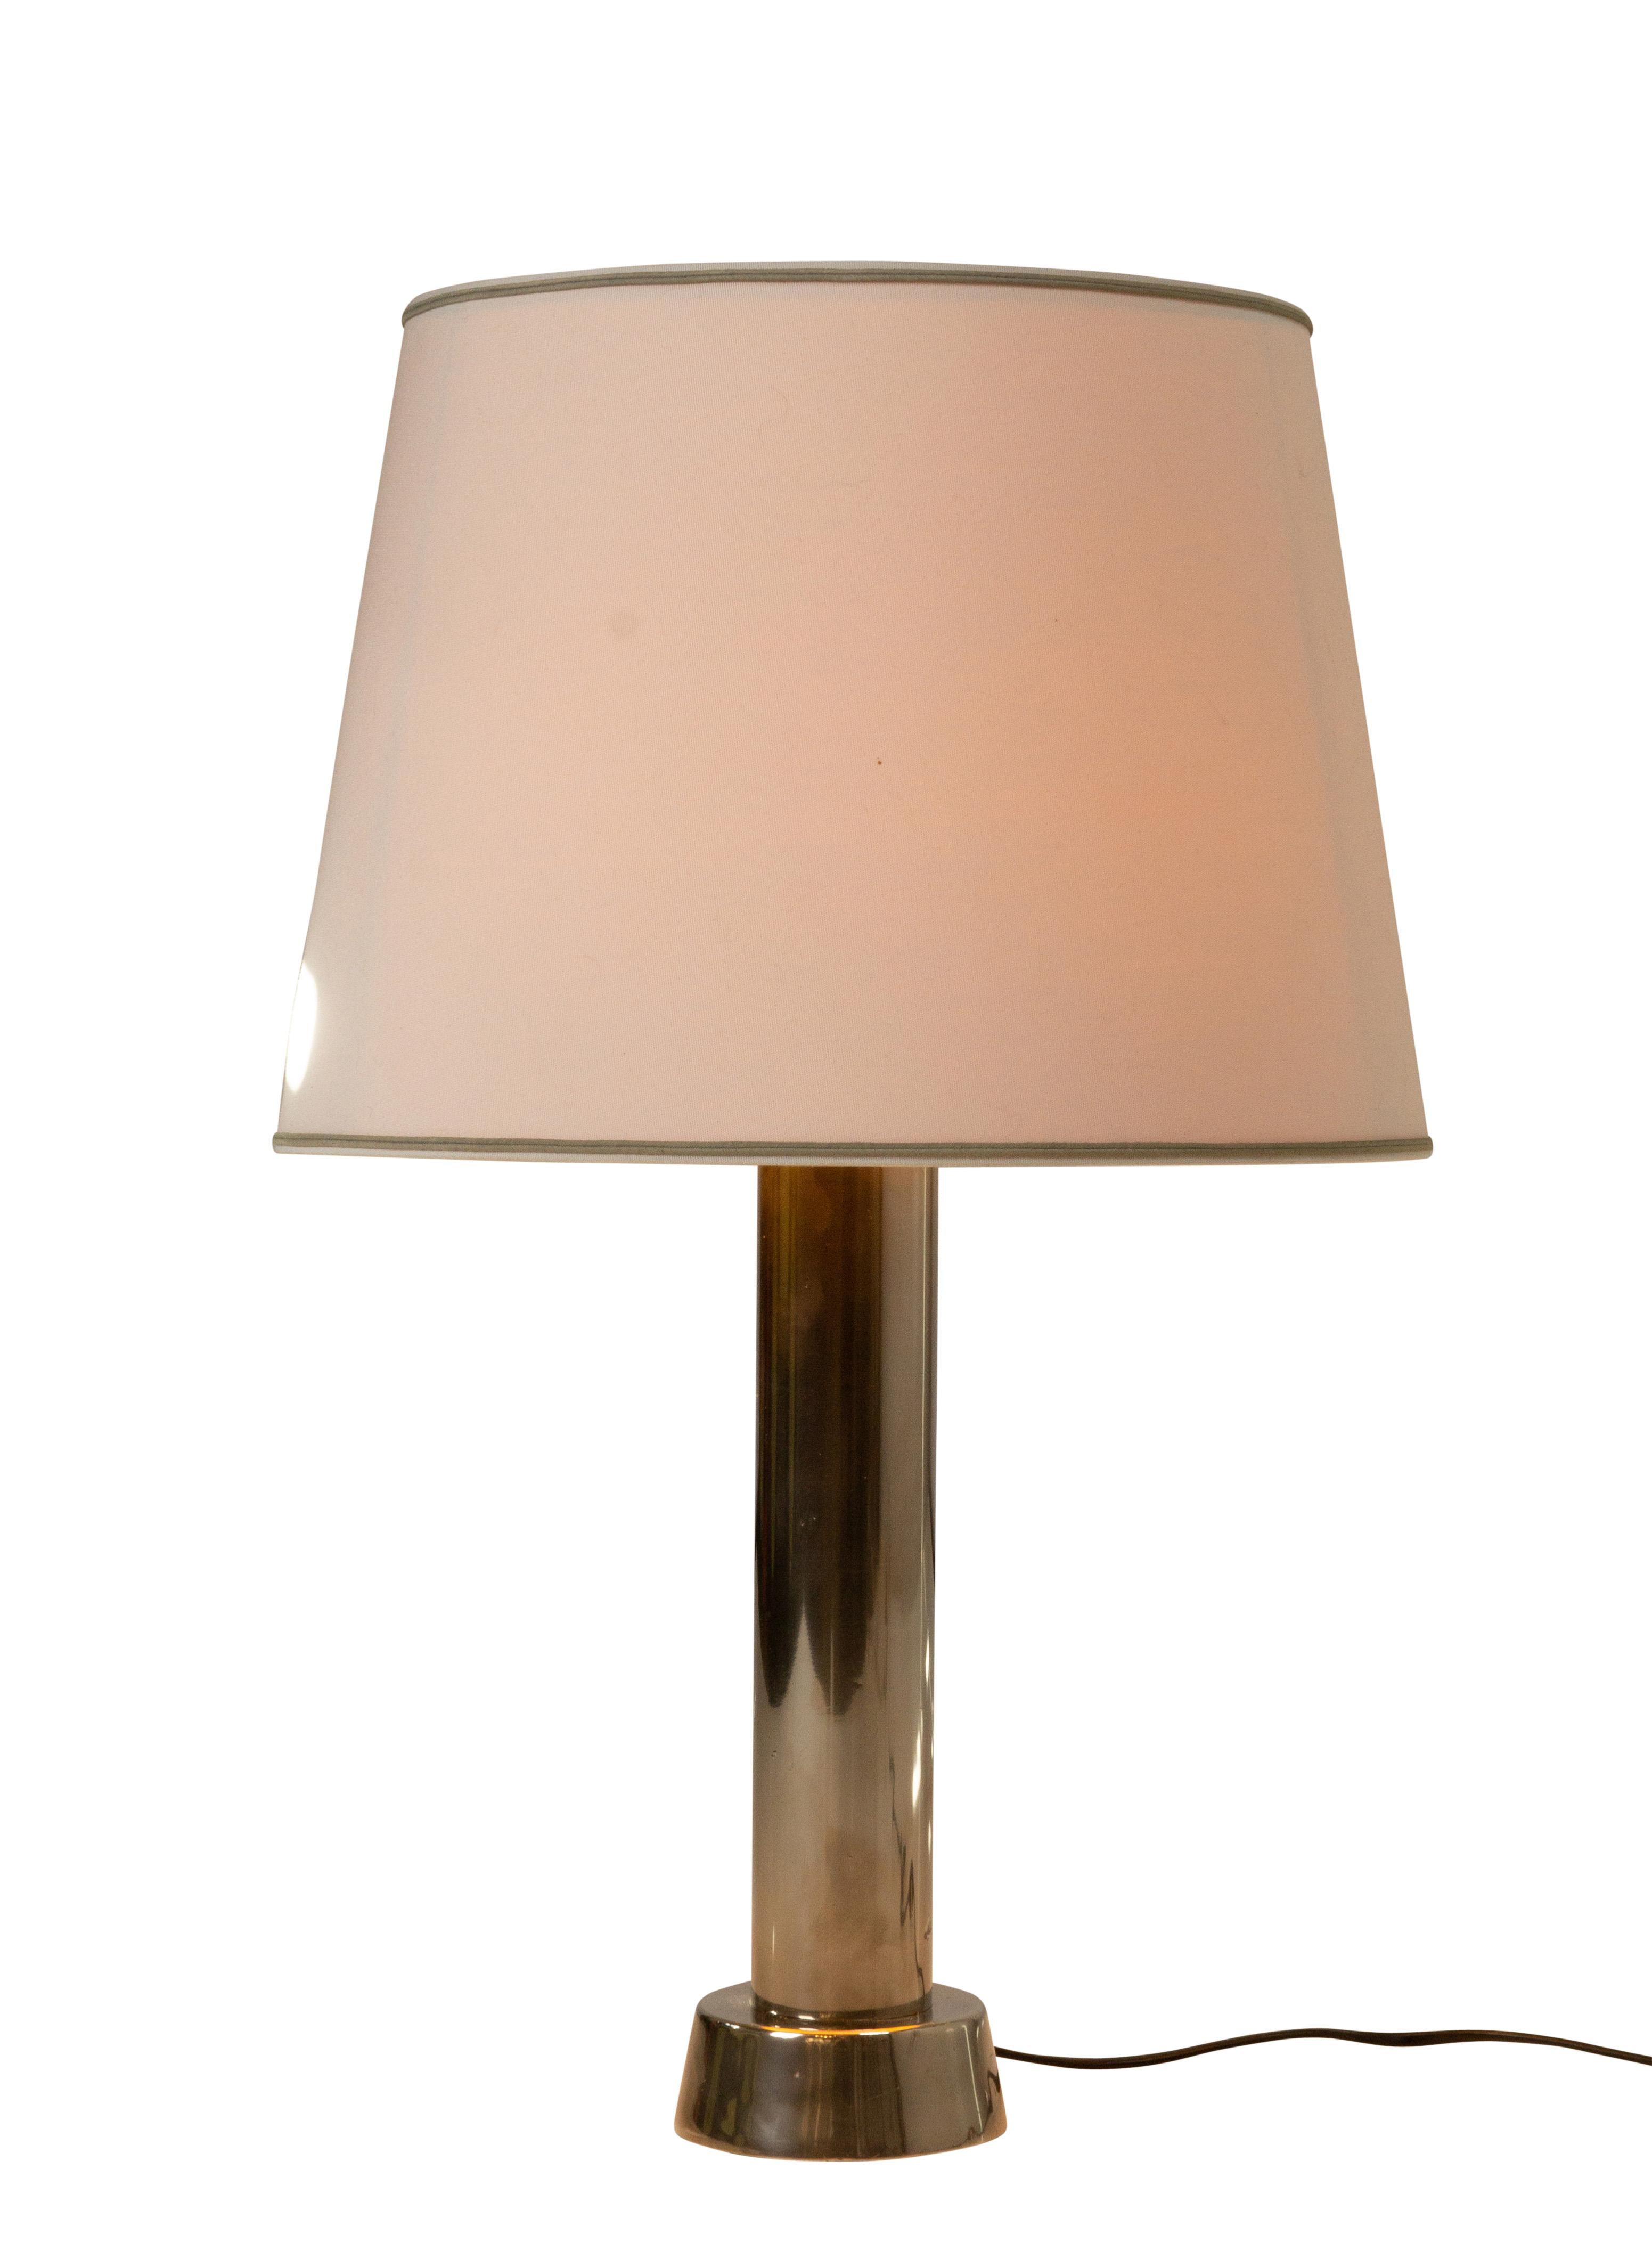 Willem Hagoort table lamp 1970’s.

Chromed cylinder as base, which is quite heavy. The shade is a beige fabric with a artificial diffuser. The artificial diffuser gives a softer light appearance and is a typical modern design detail. Minimal signs